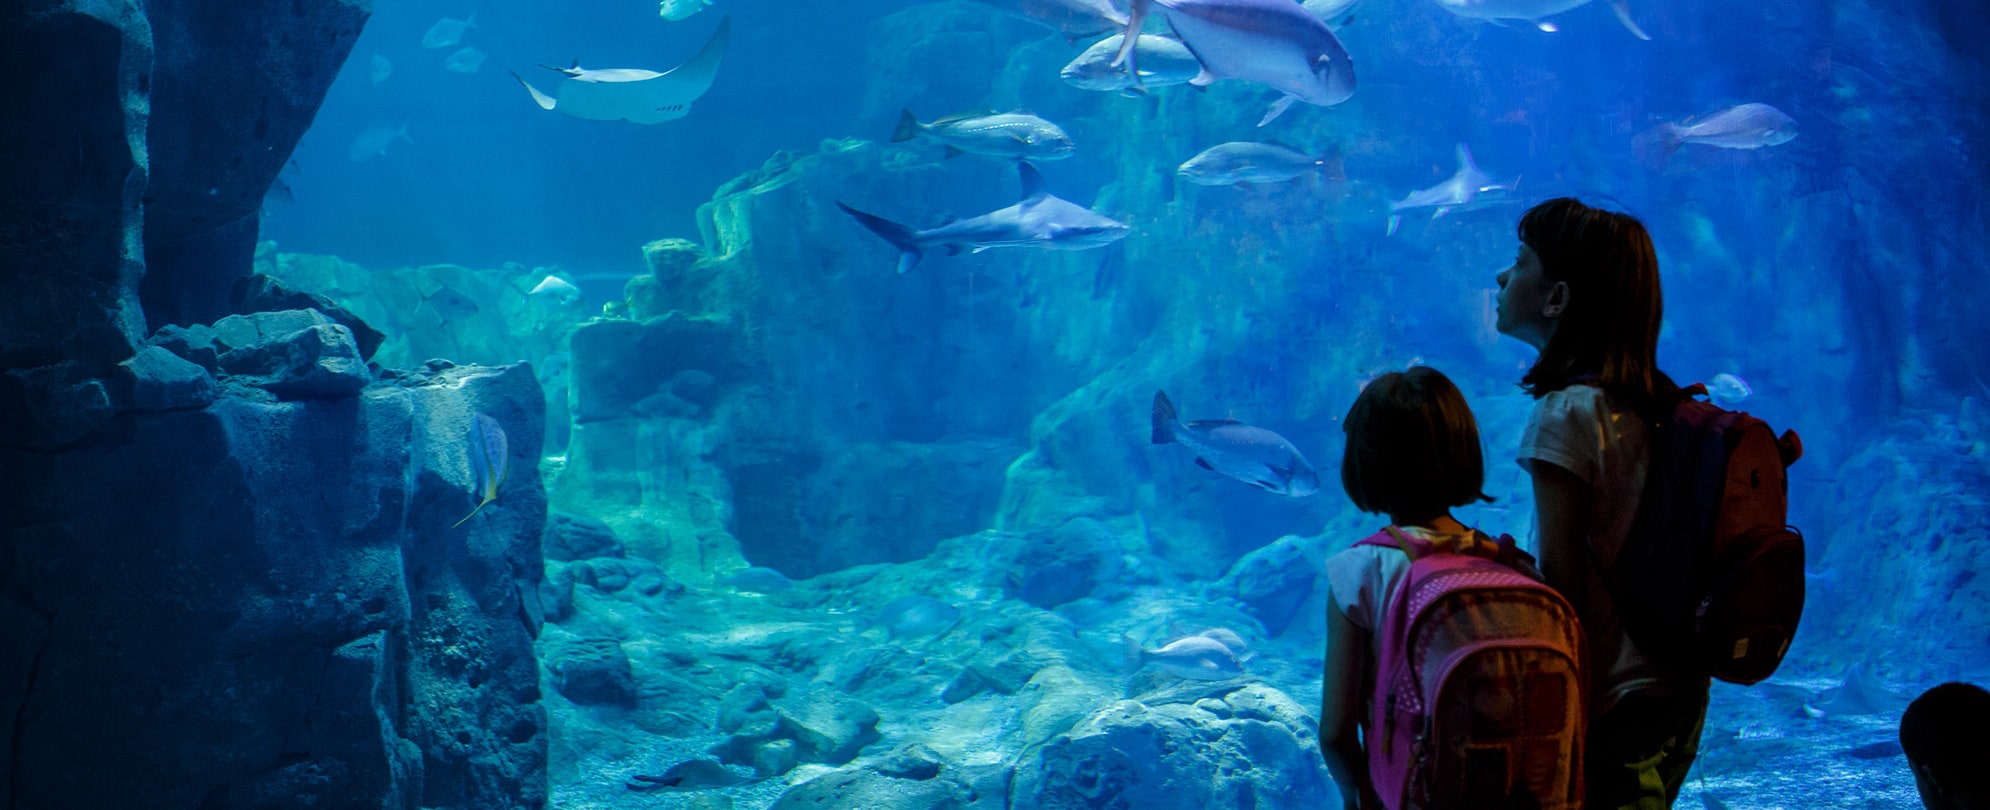 Two young girls wearing backpacks look into the tank of sharks and fish at the SEA LIFE Aquarium in San Diego, California.